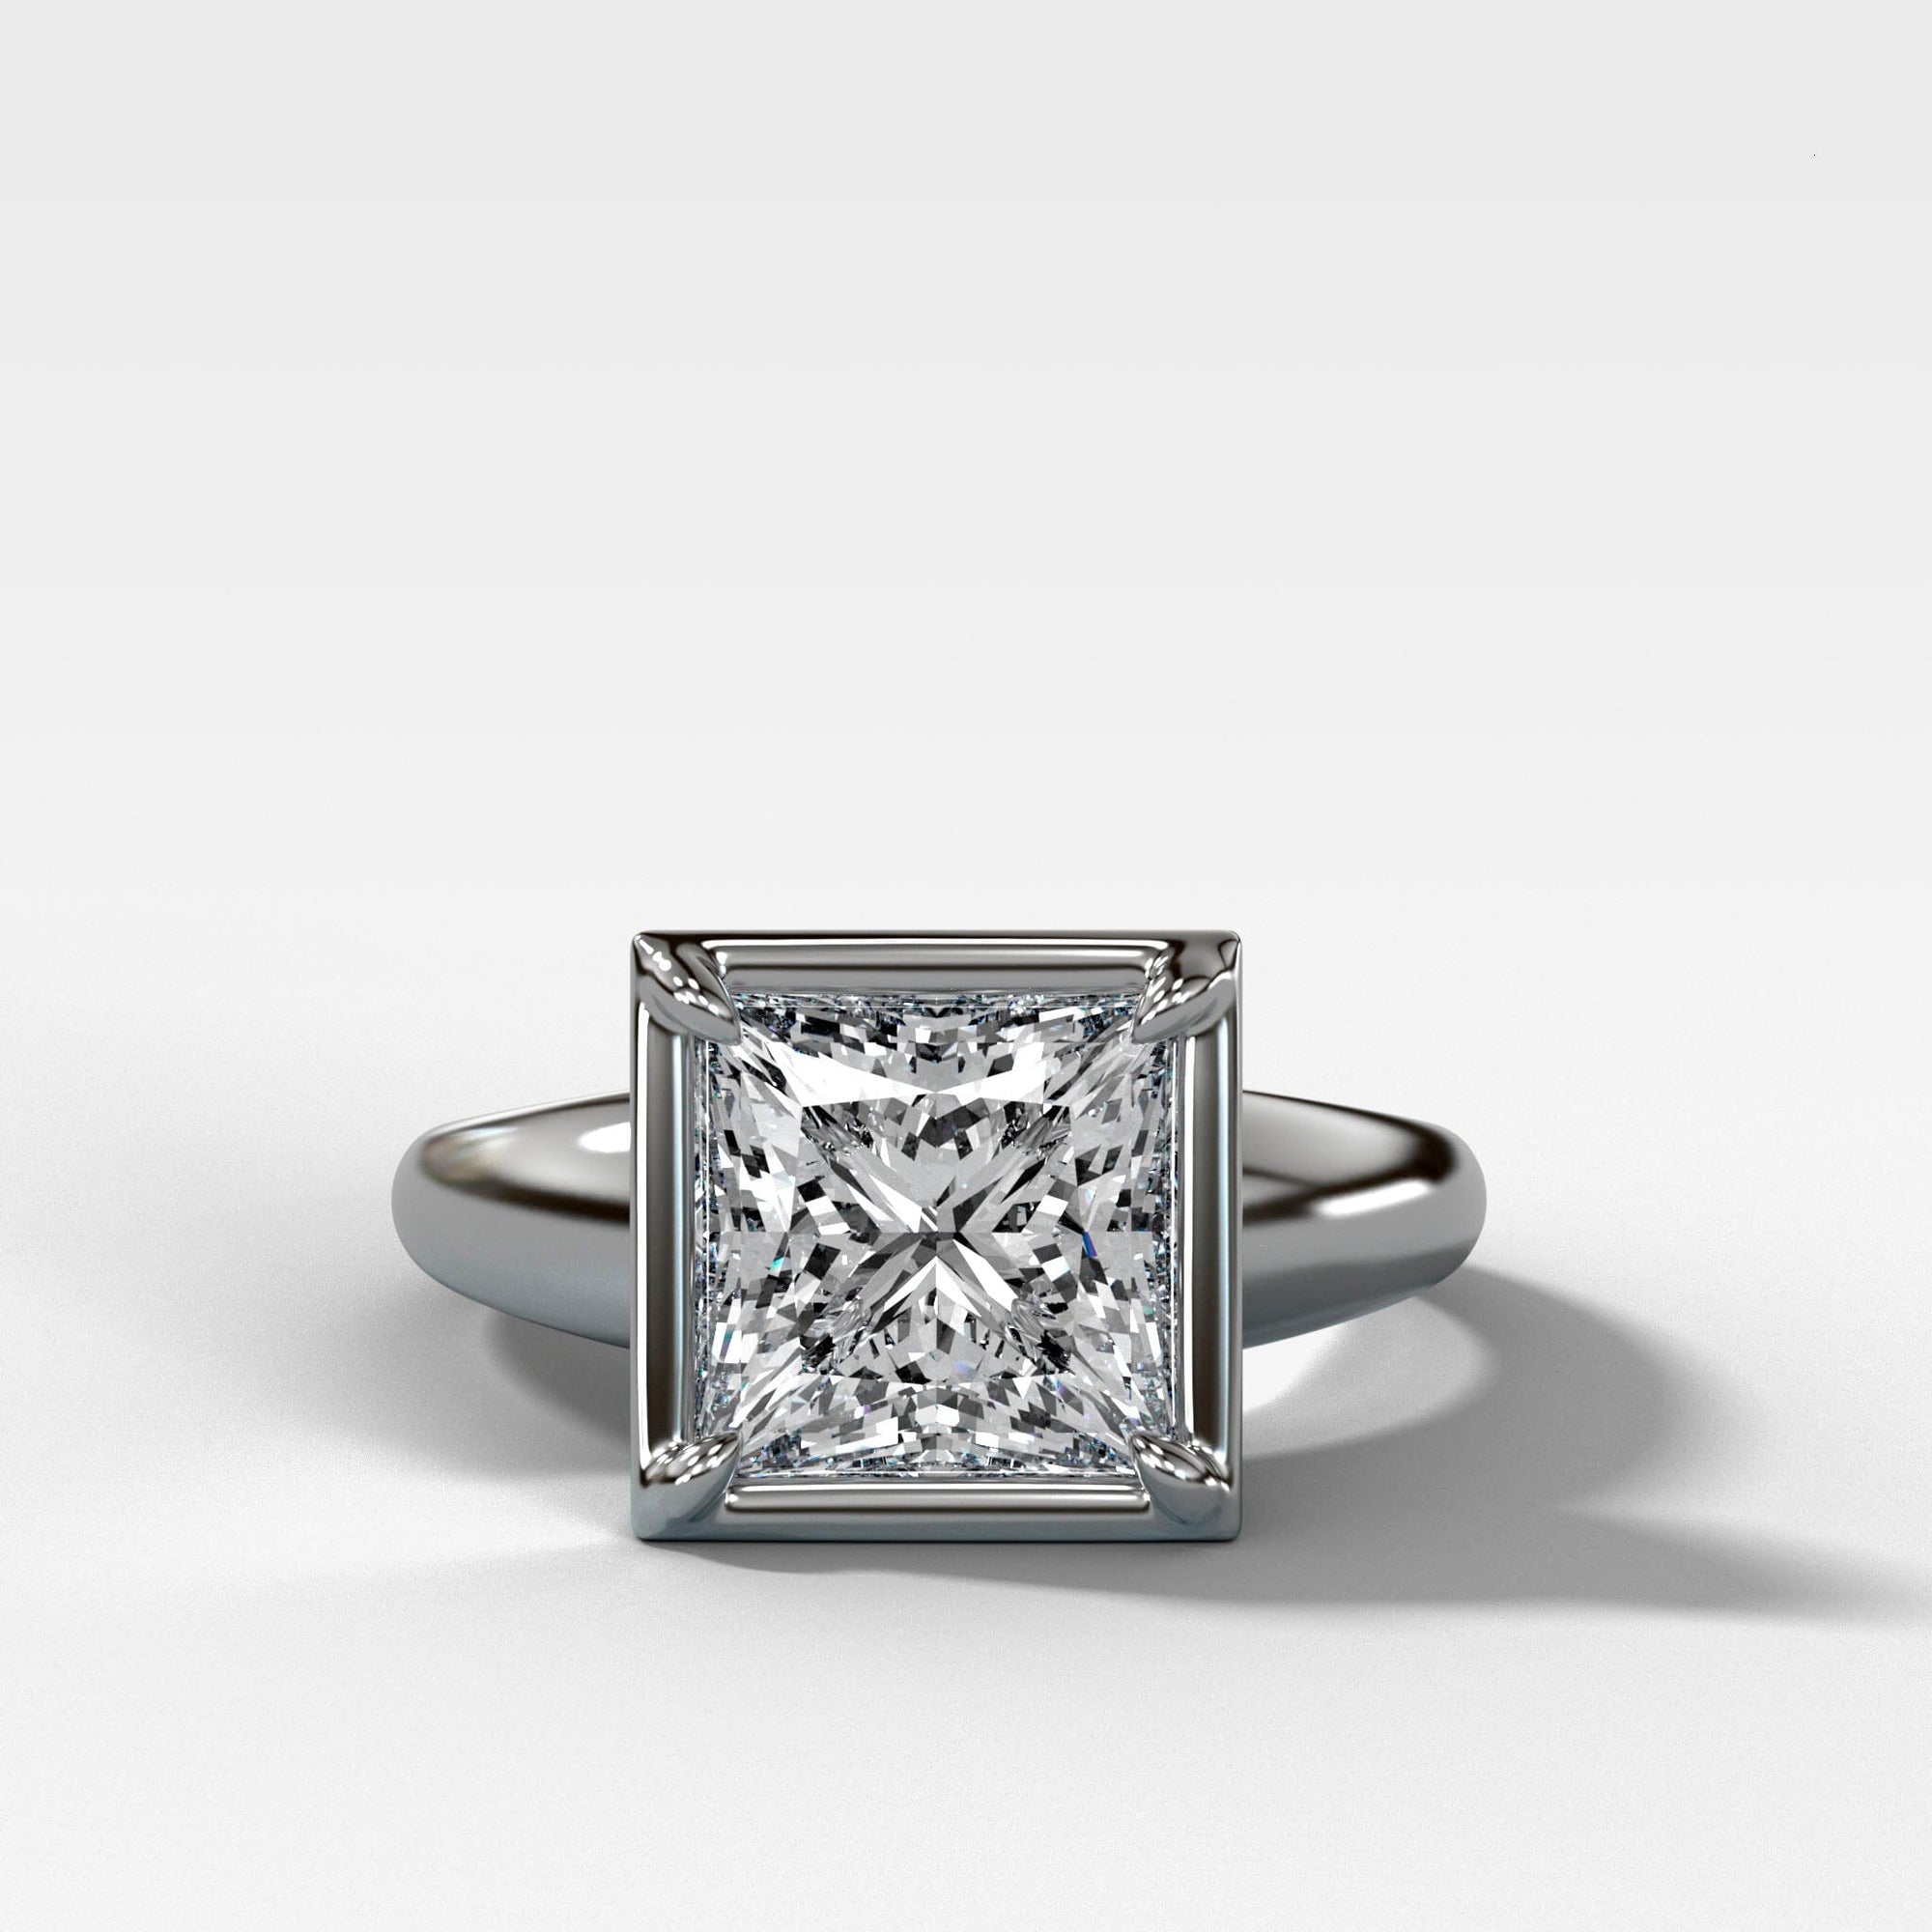 Club Ring Solitaire With a Princess Cut Engagement Good Stone Inc 